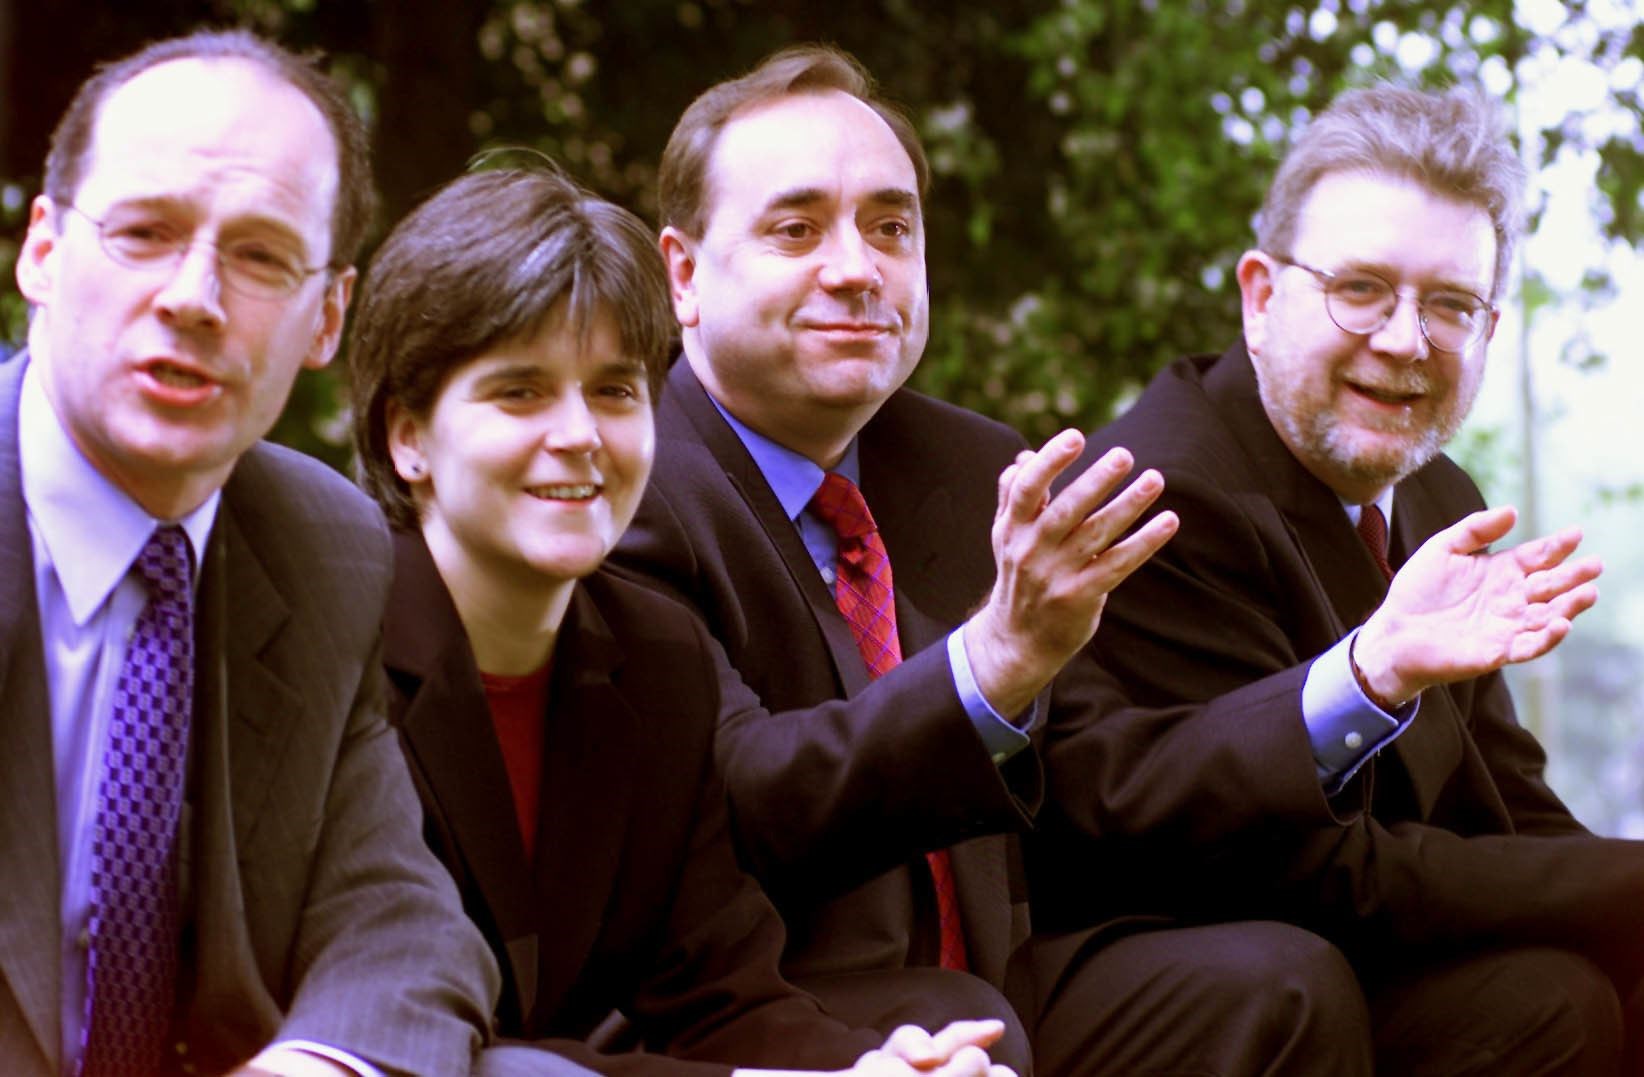 In 1999, Ms Sturgeon was SNP vice-convener during the Holyrood elections. She stood for the Glasgow Govan seat and lost, but joined the Scottish Parliament under the party list. Seen here with party colleagues, from left, deputy convenor John Swinney, party leader Alex Salmond and chief executive Mike Russell after the Scottish parliamentary elections of 1999 (Ben Curtis/PA)